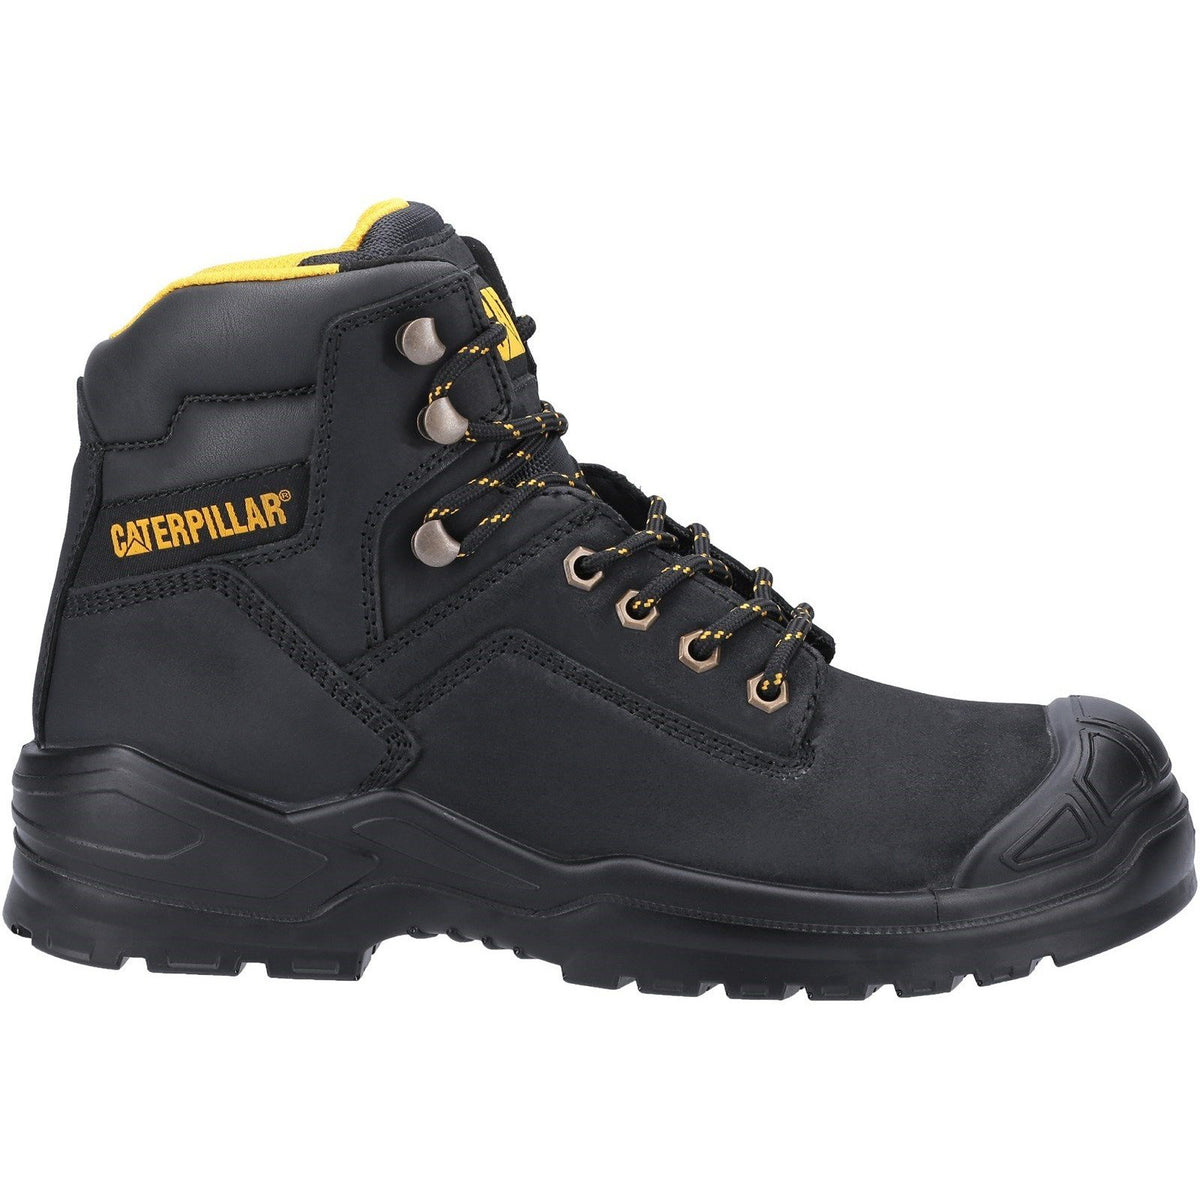 Caterpillar Striver S3 Wide-Fit Safety Boot with Bump Cap & Steel Toe ...